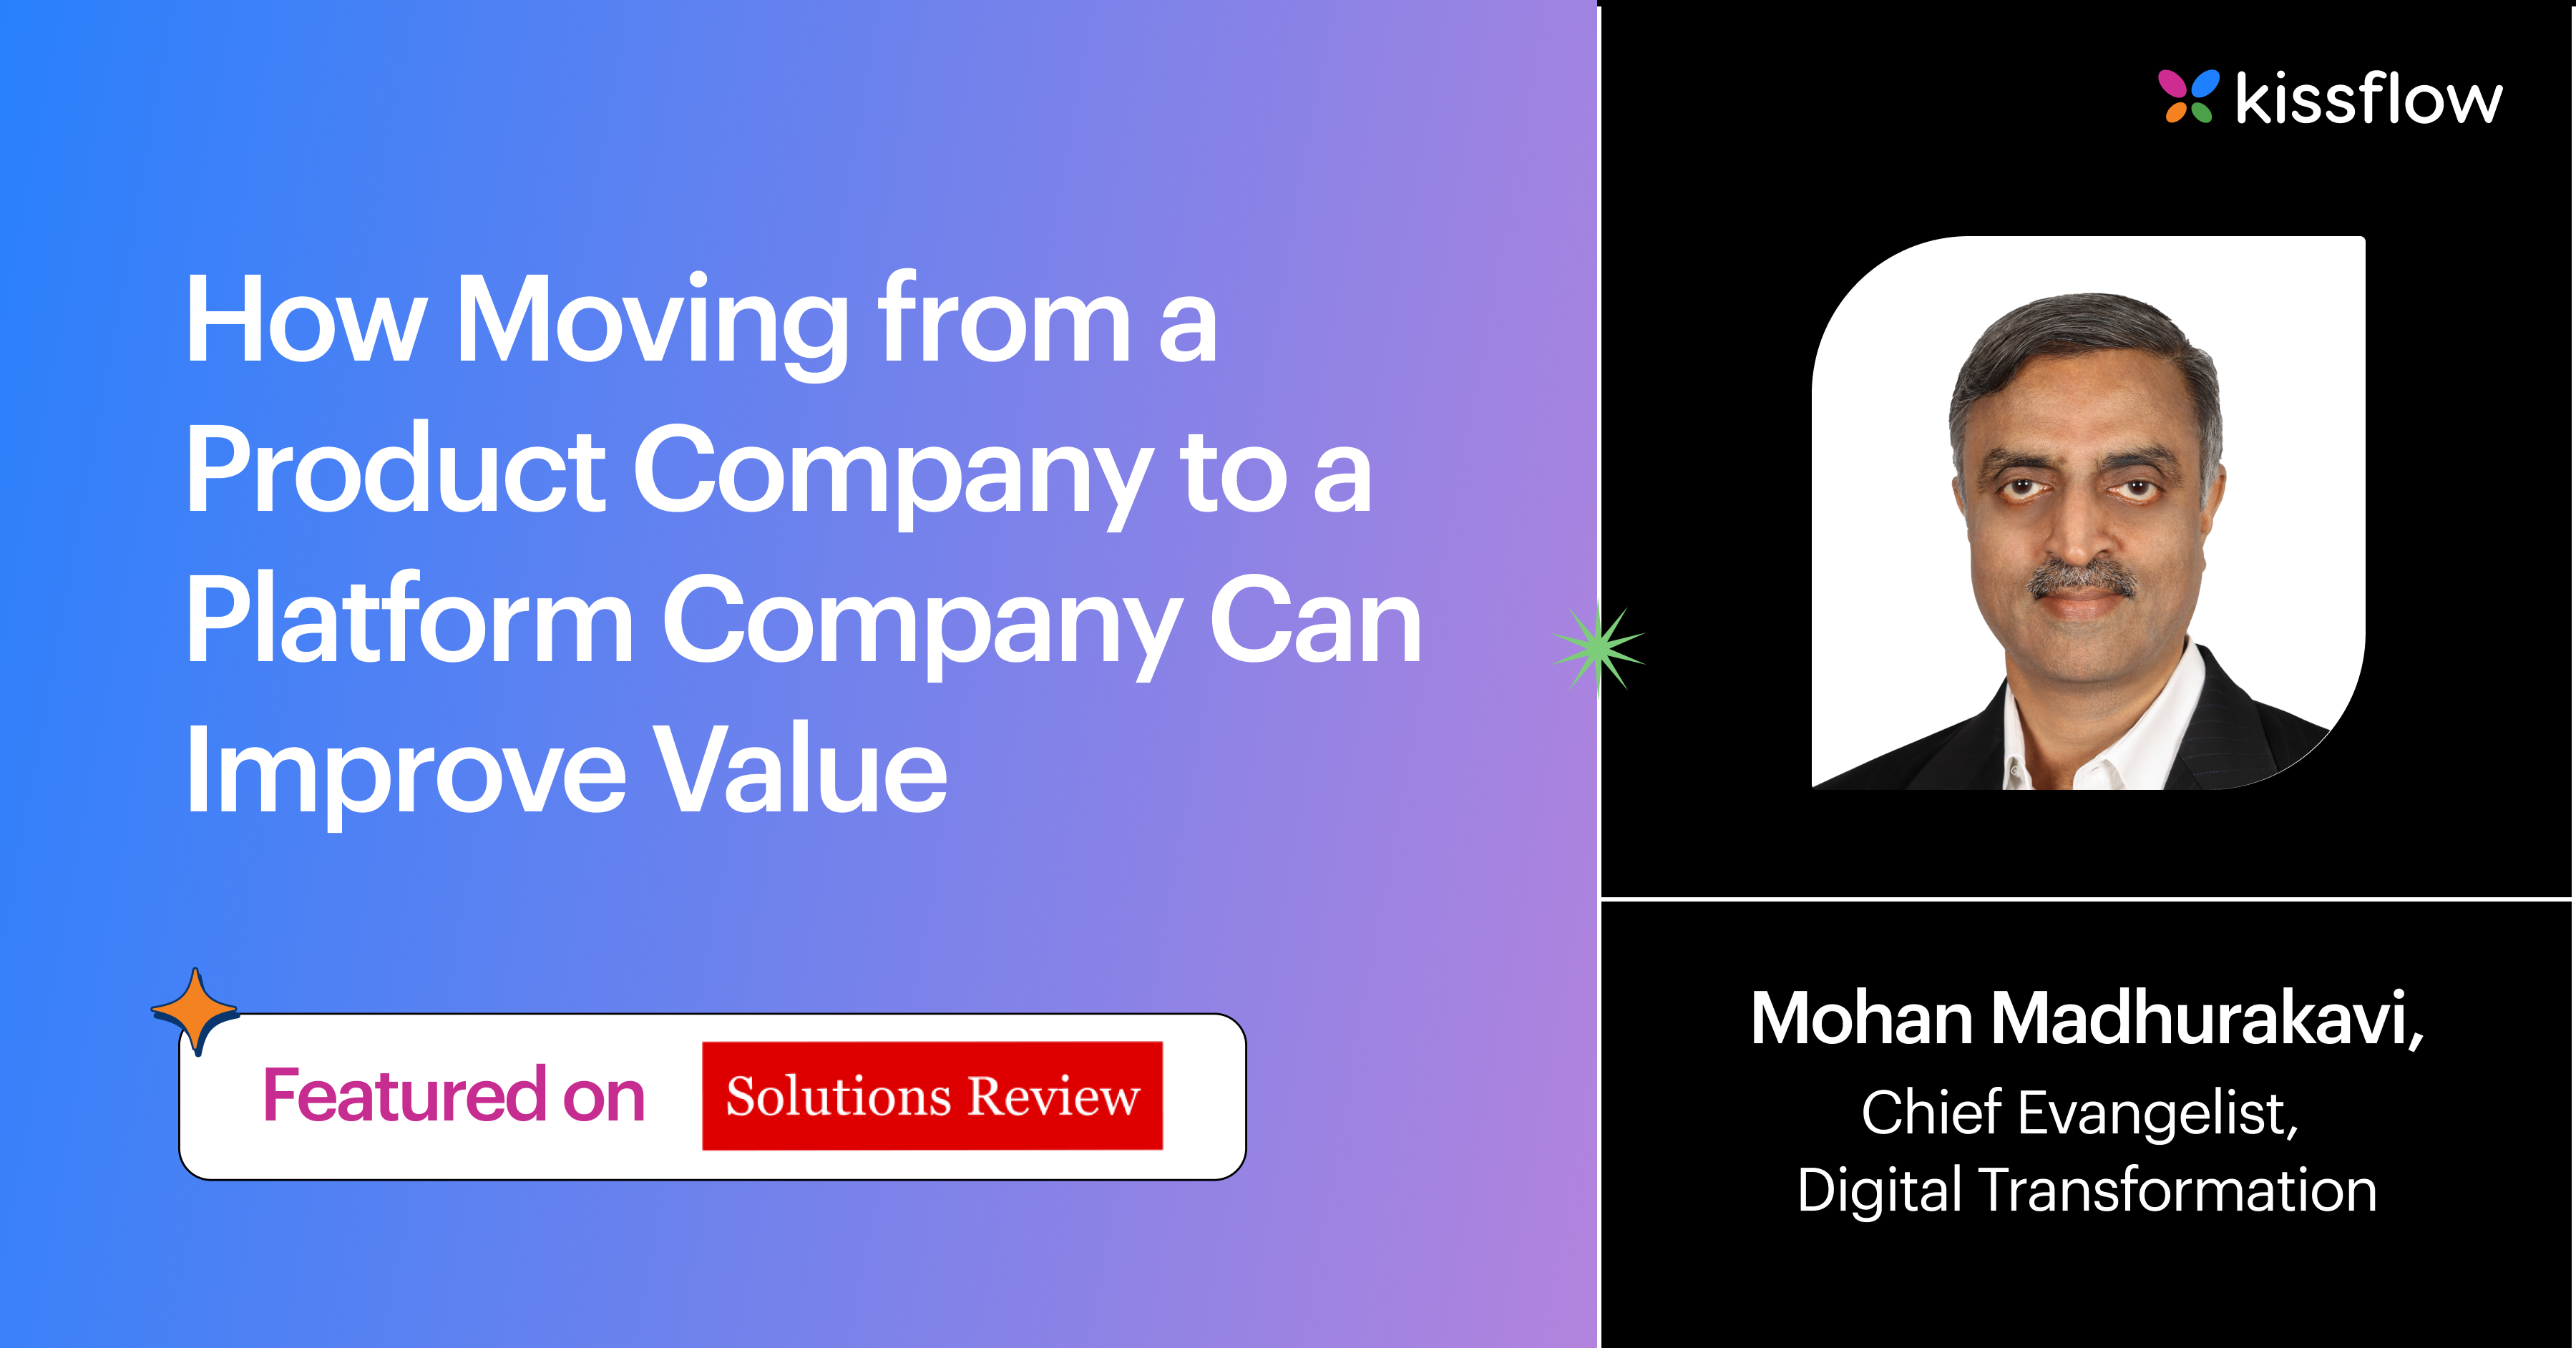 How Moving from a Product Company to a Platform Company Can Improve Value